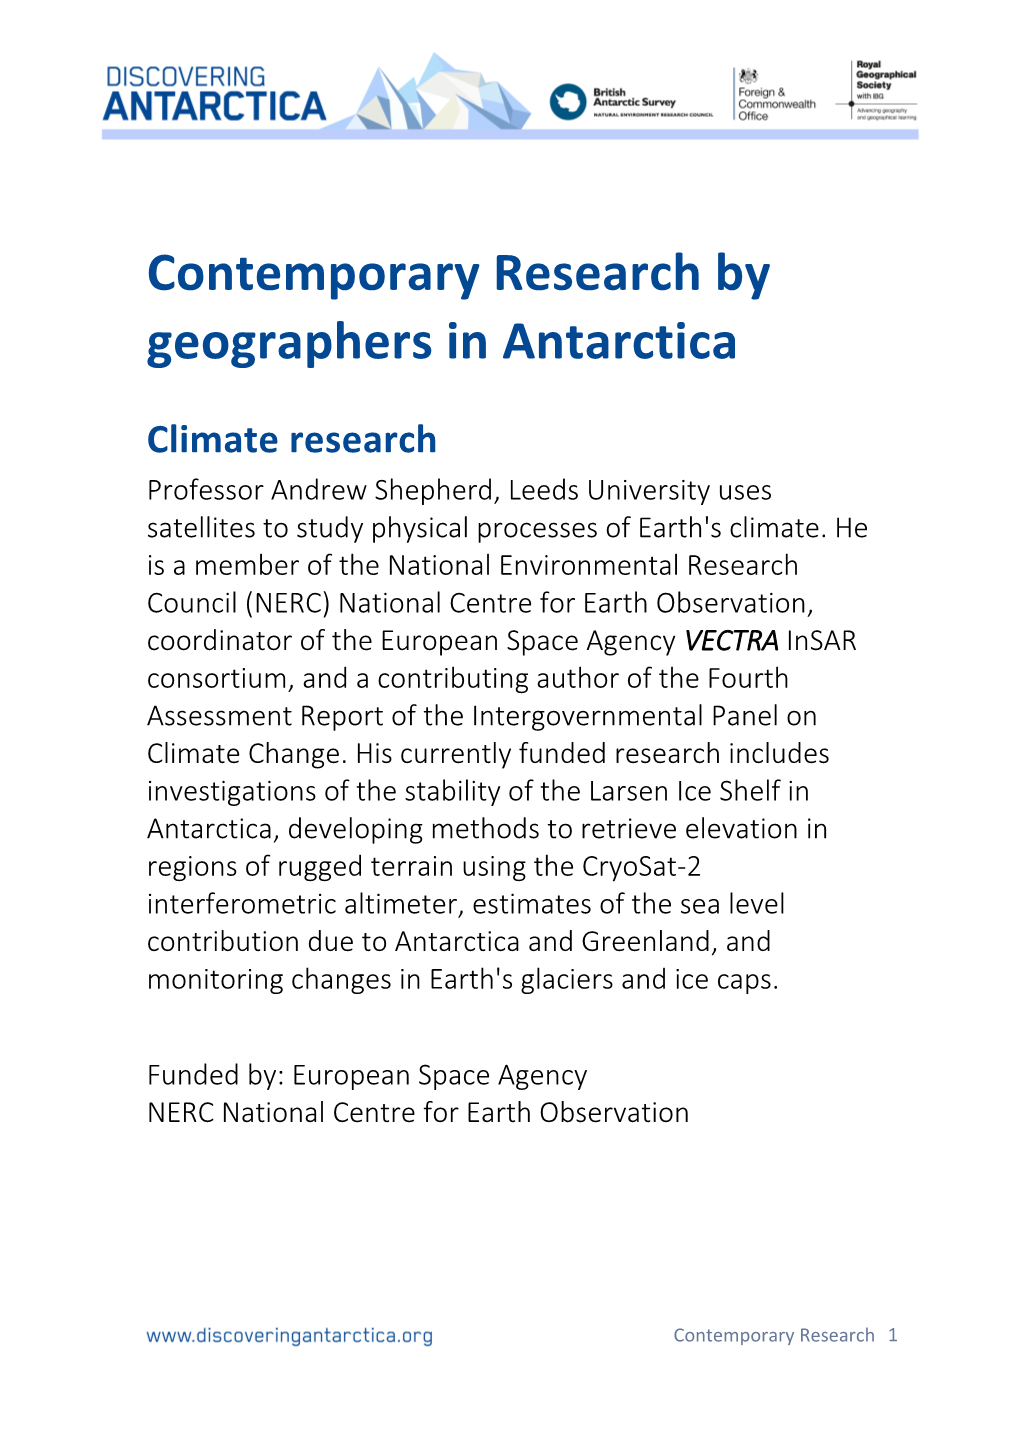 Contemporary Research by Geographers in Antarctica